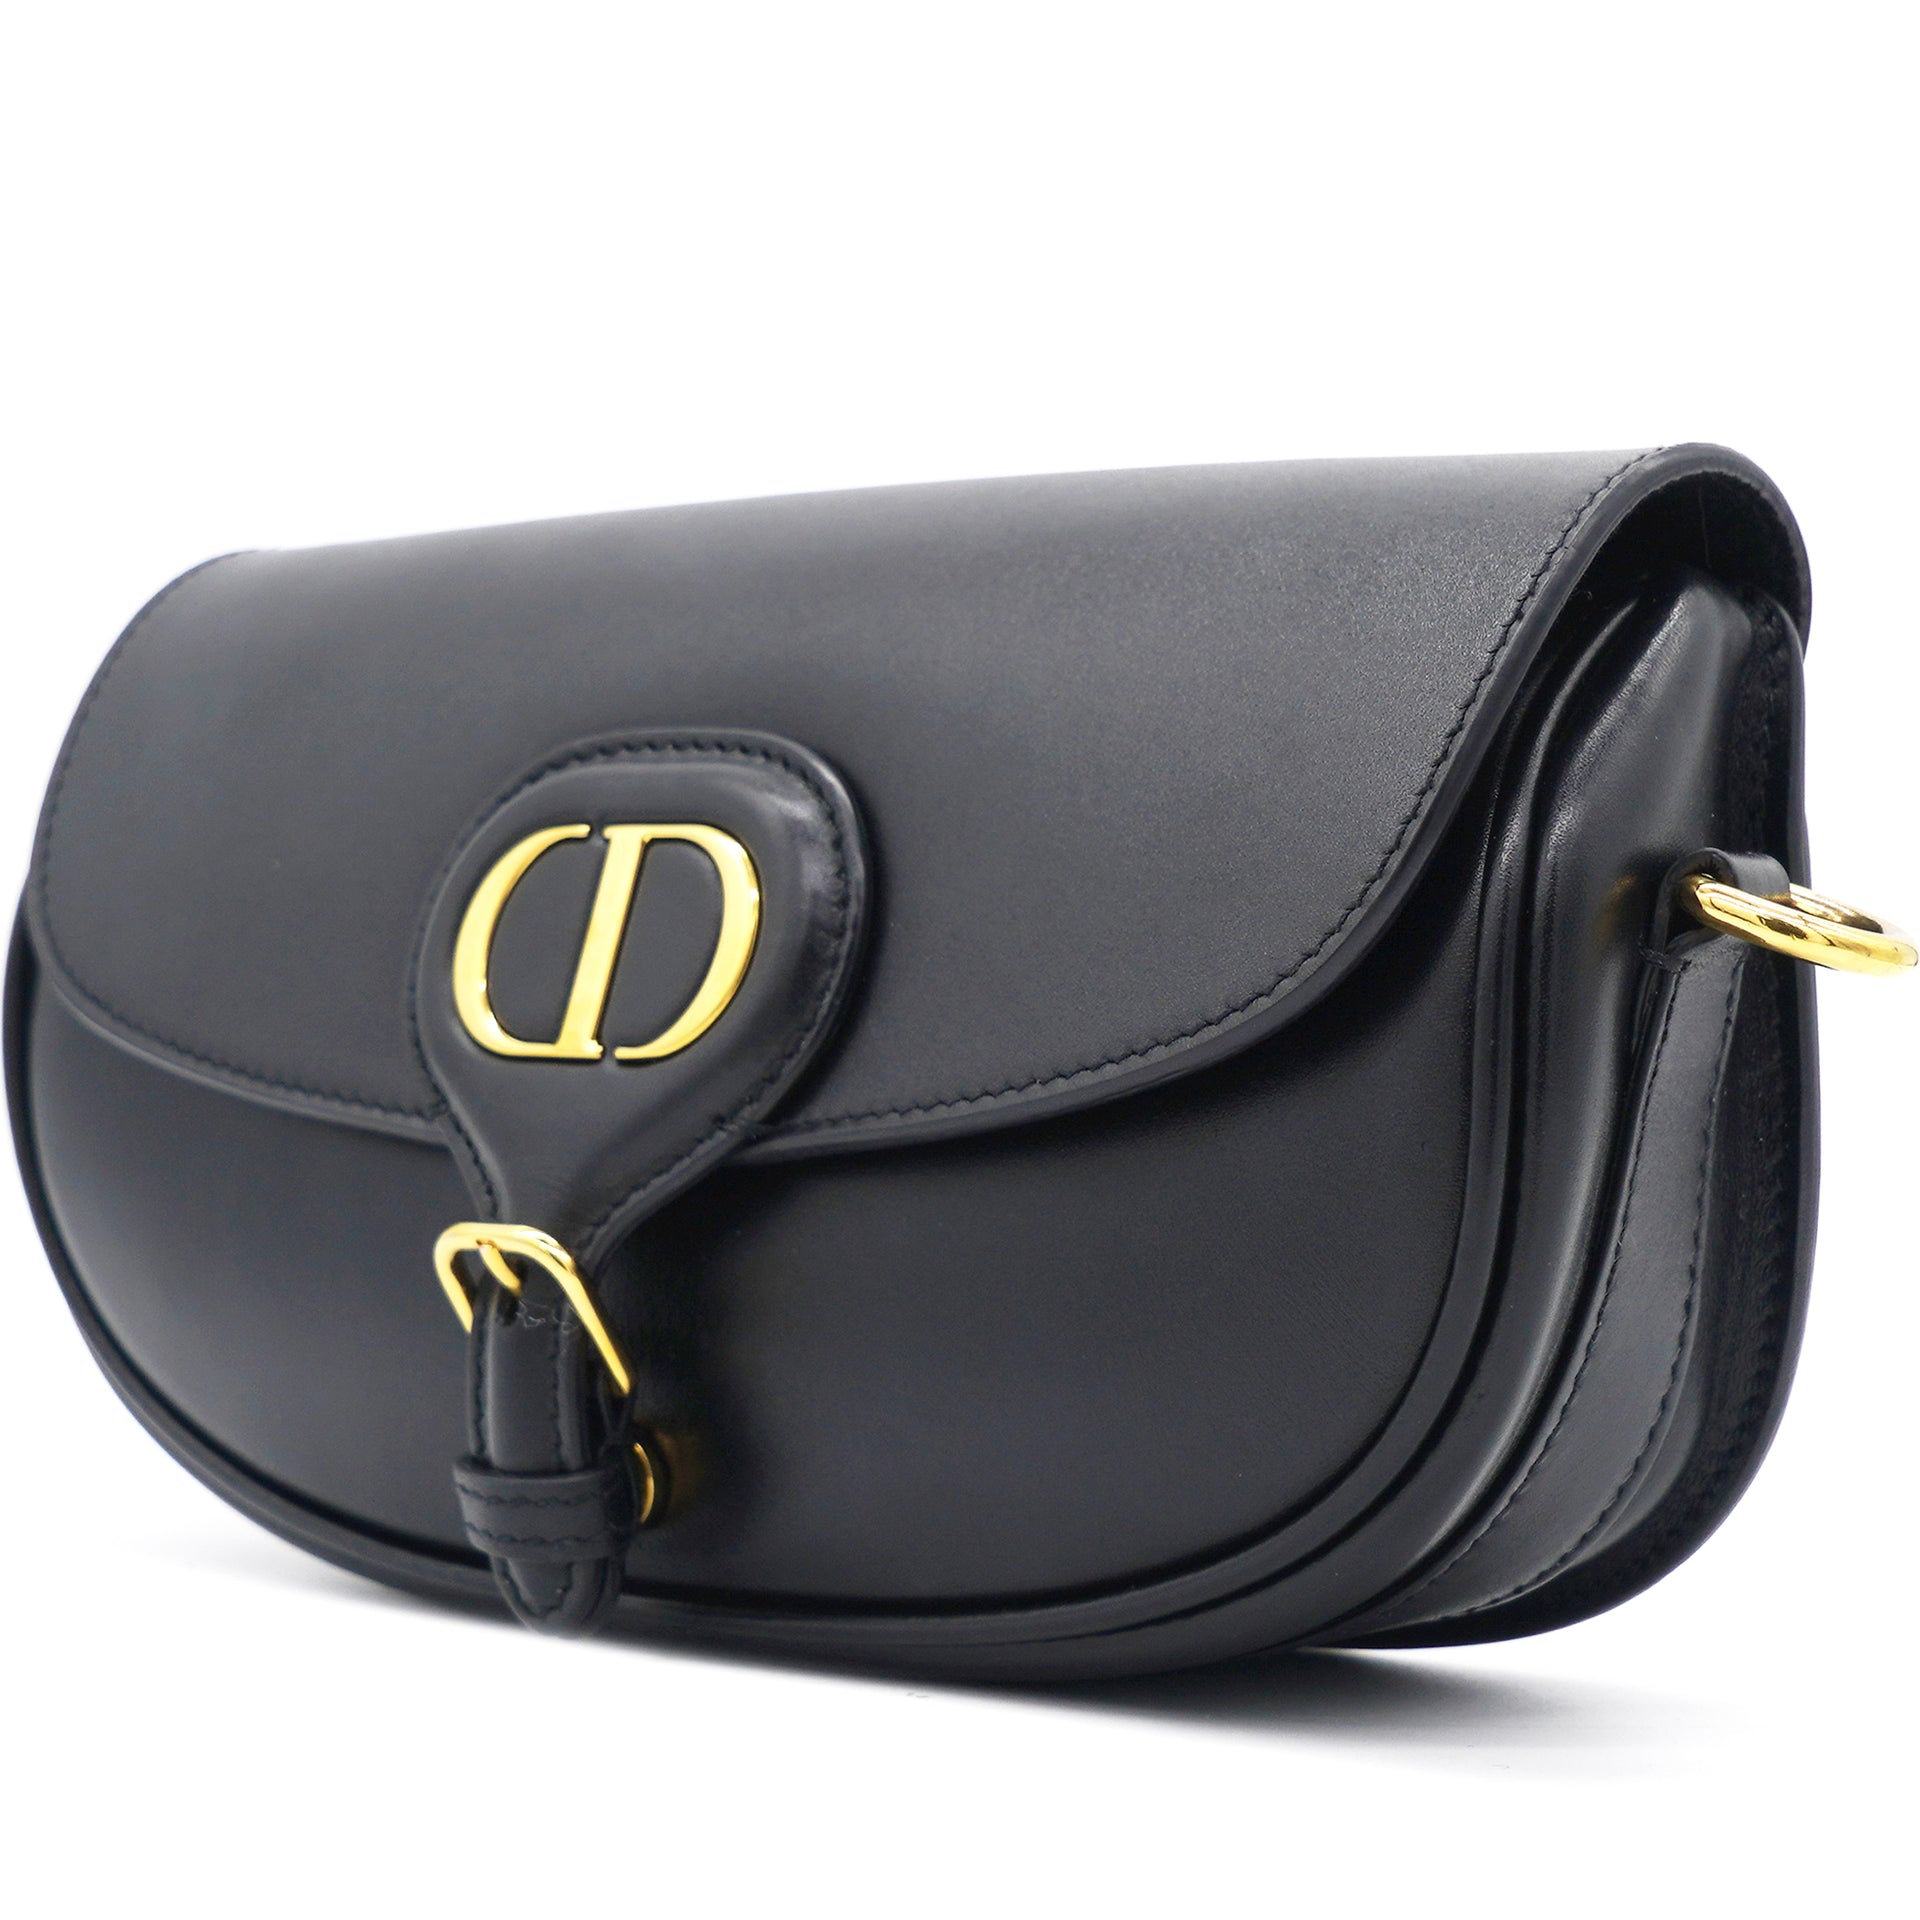 Dior Bobby Bag On Sale - Authenticated Resale